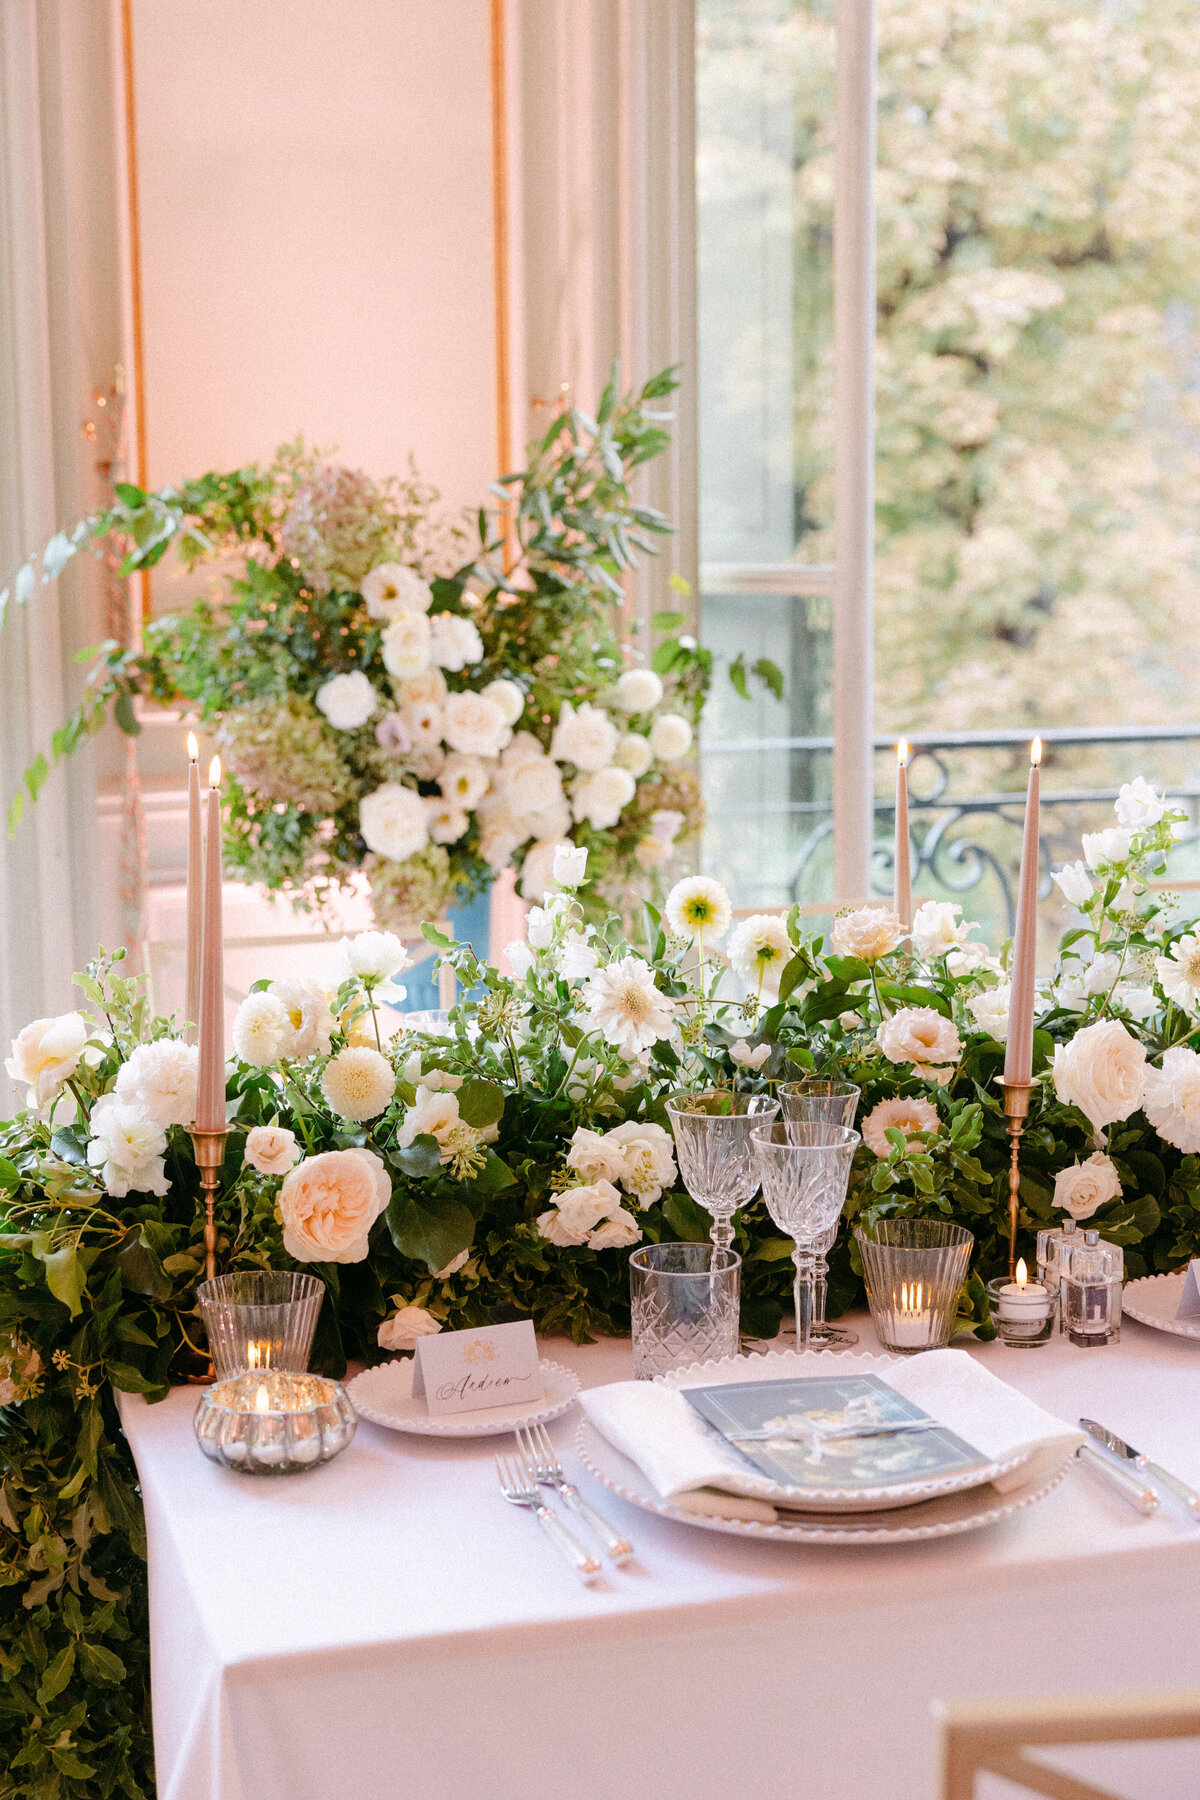 Jennifer Fox Weddings English speaking wedding planning & design agency in France crafting refined and bespoke weddings and celebrations Provence, Paris and destination wd810